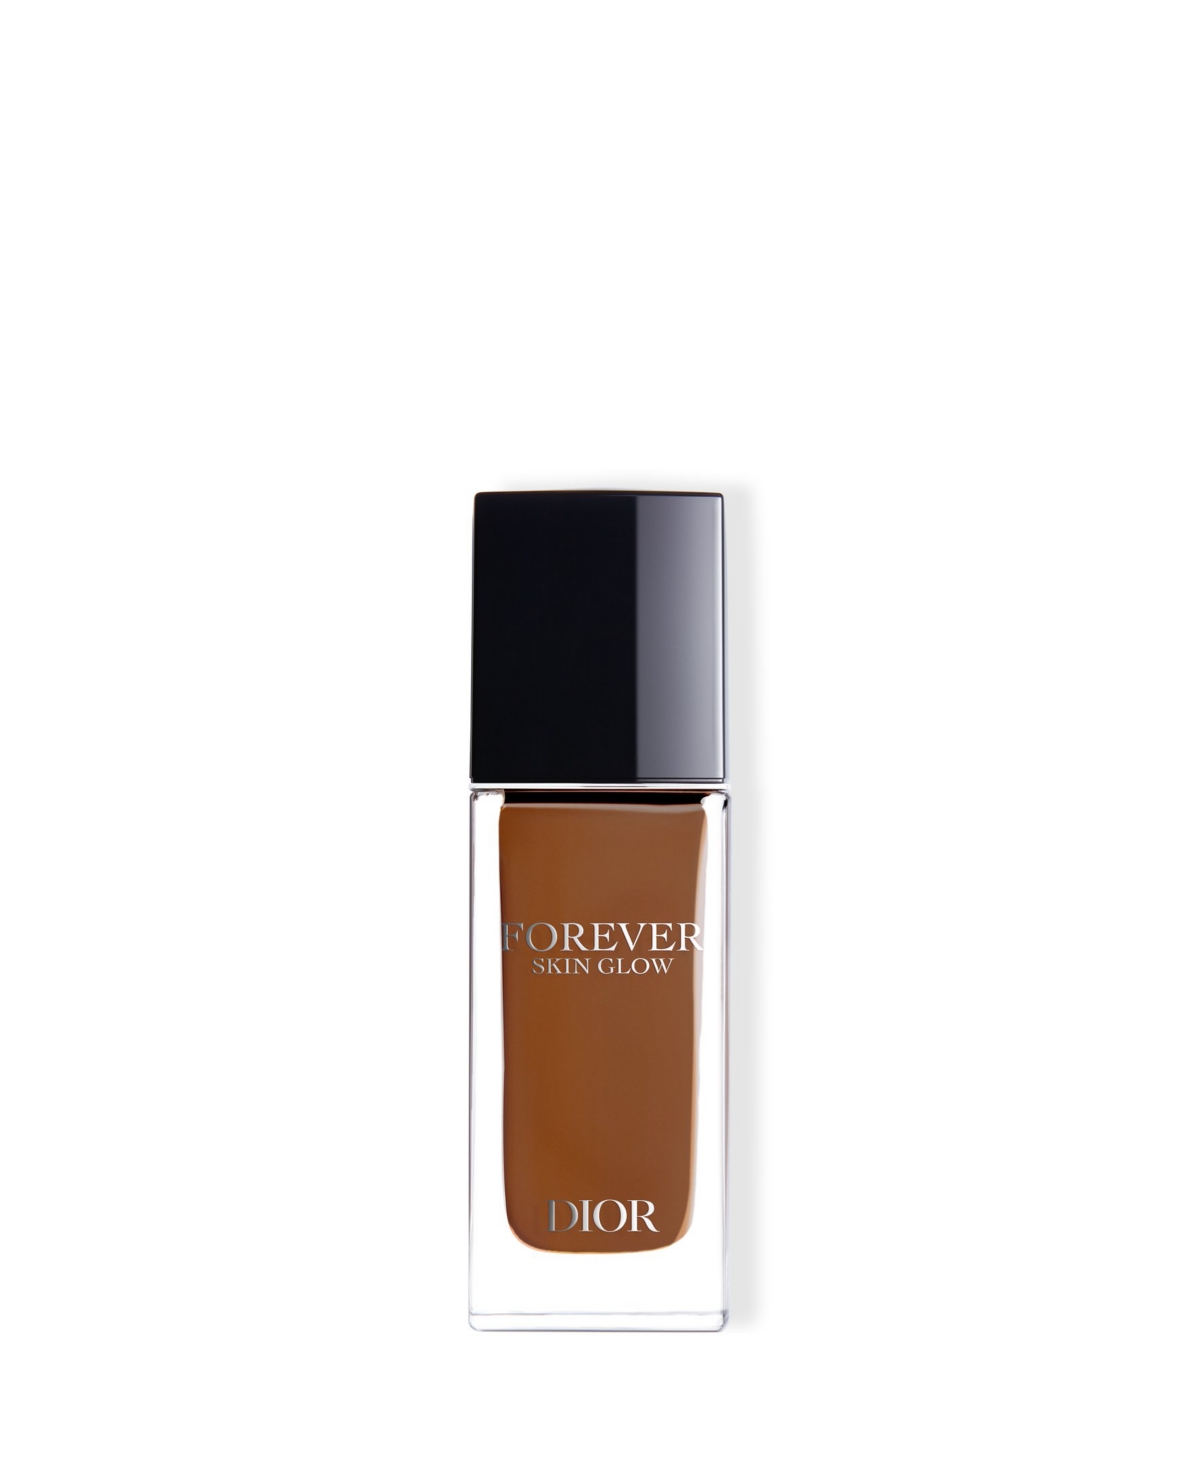 Dior Forever Skin Glow Hydrating Foundation Spf 15 In Neutral ( Deep Skin With Neutral Underto